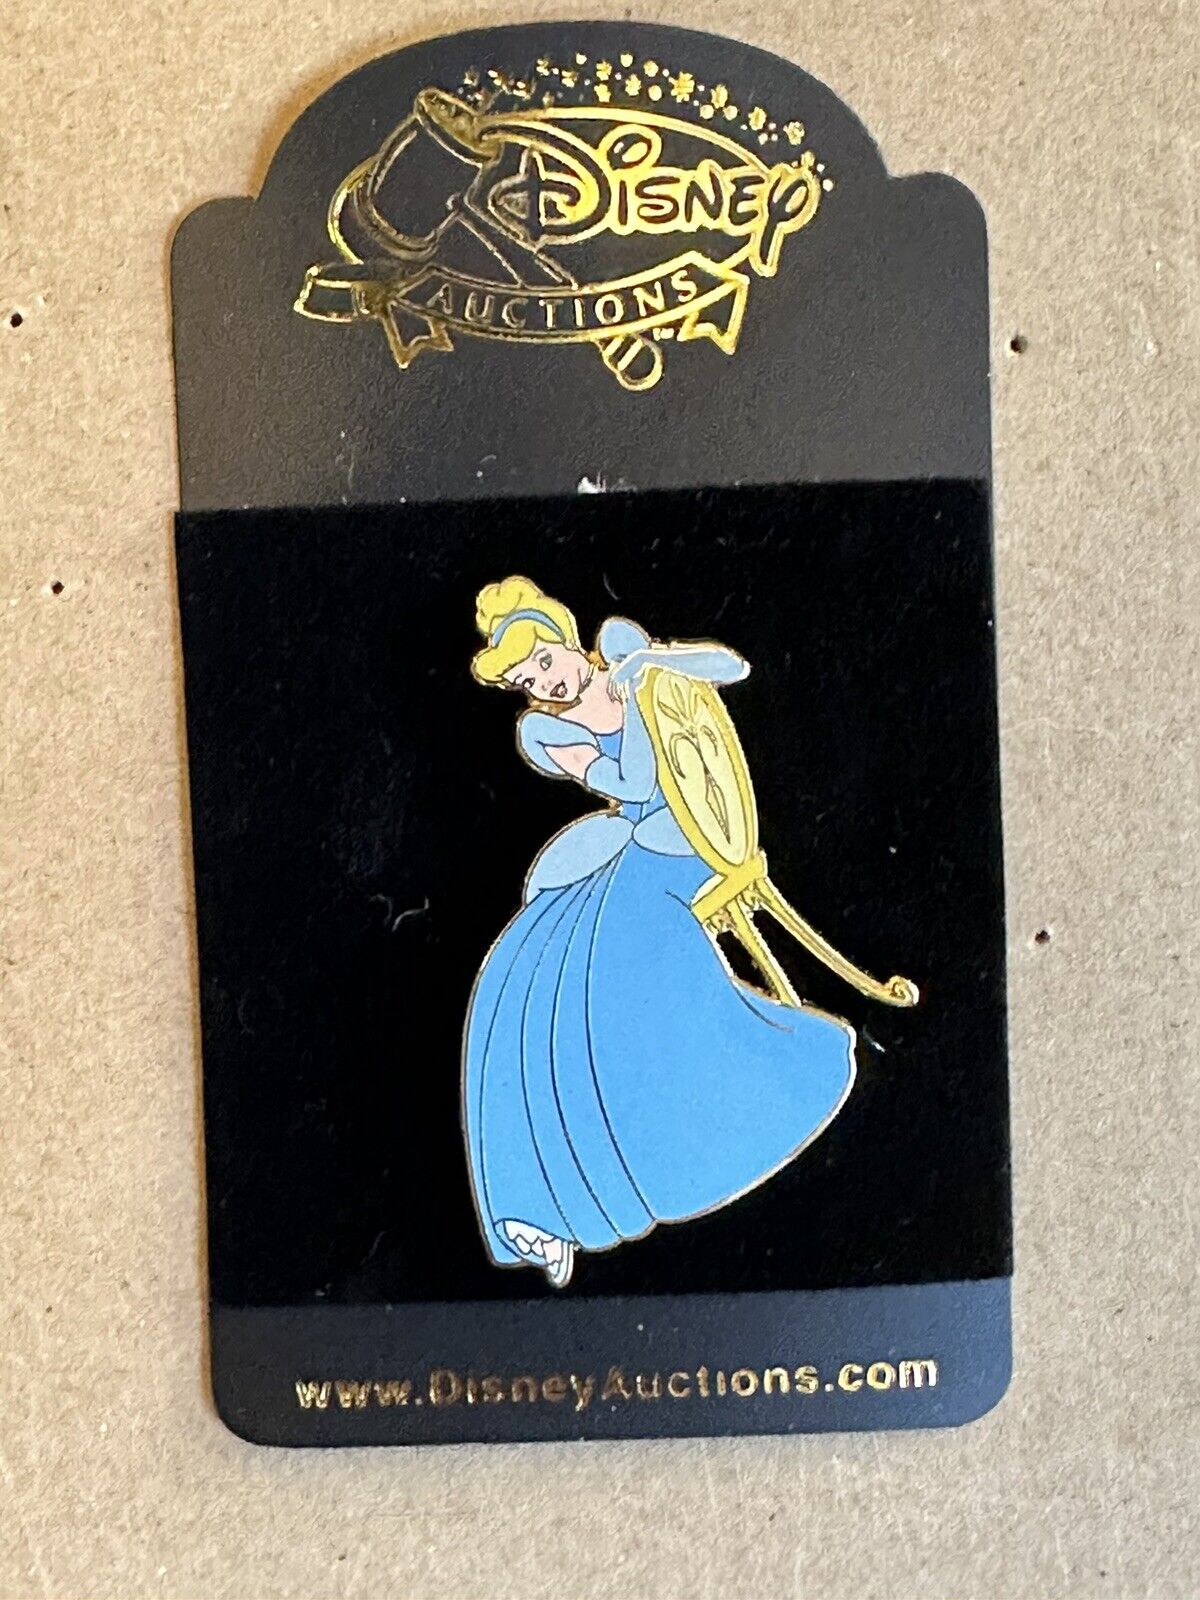 Disney Auctions Cinderella Seated Sitting on Chair Pin LE 1000